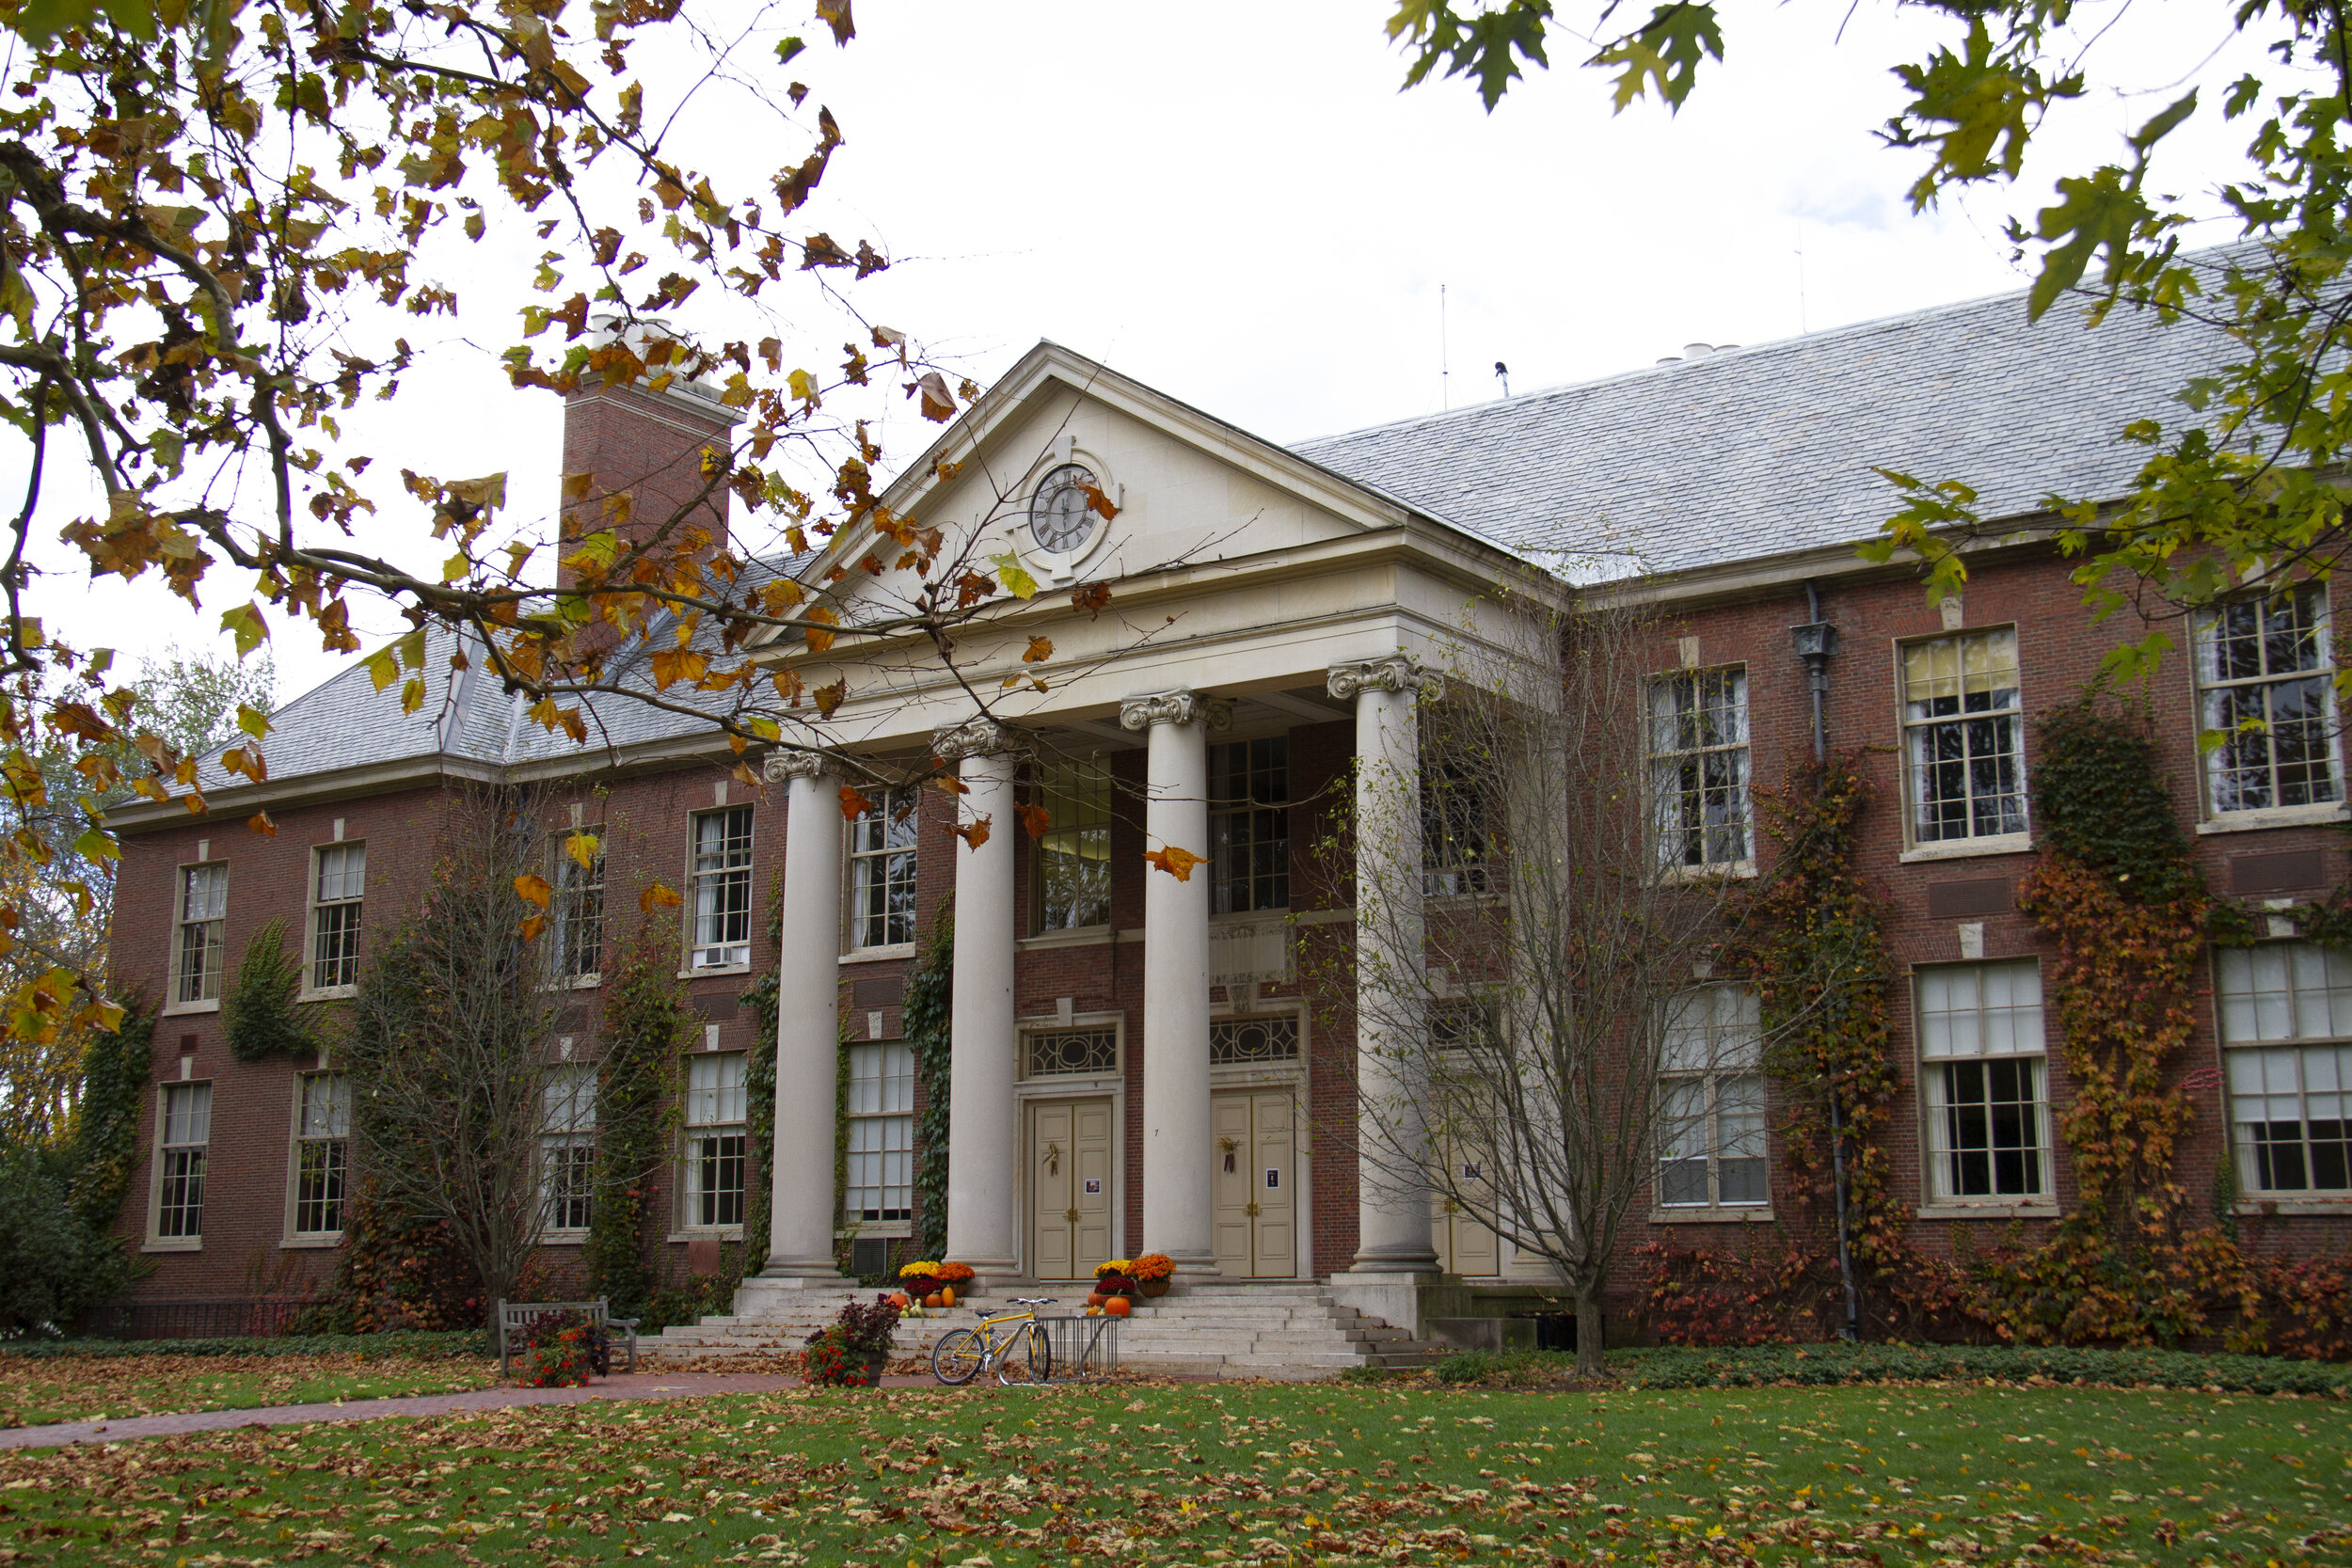 Deerfield Academy, founded 1797